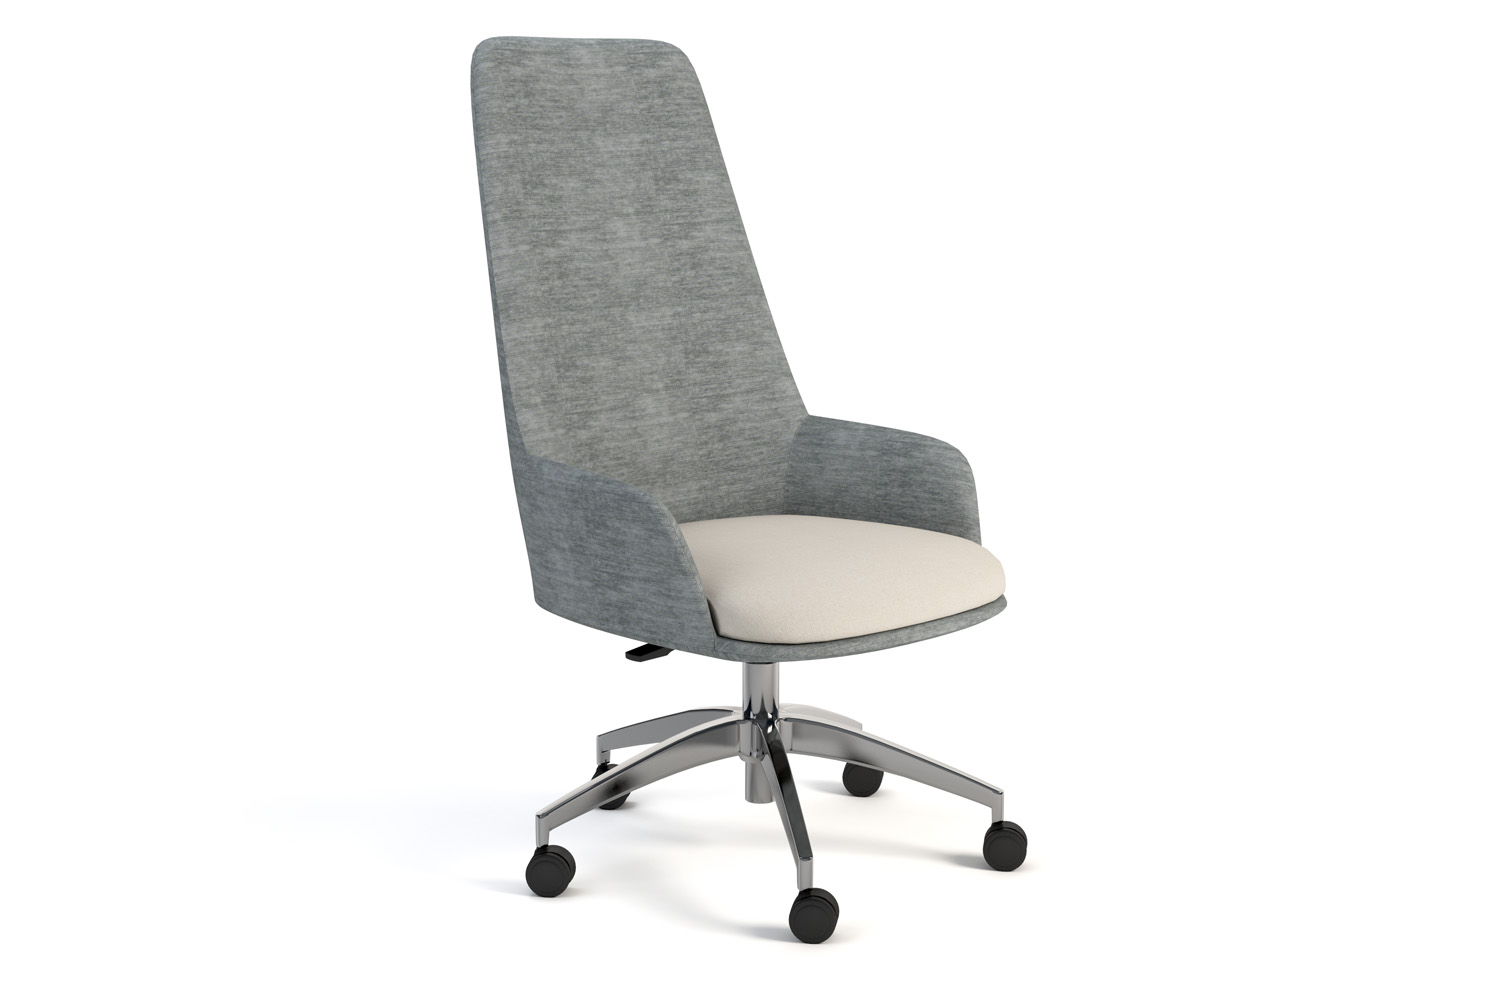 Logan 2 Fabric High Back 5-Star Swivel Base with Casters